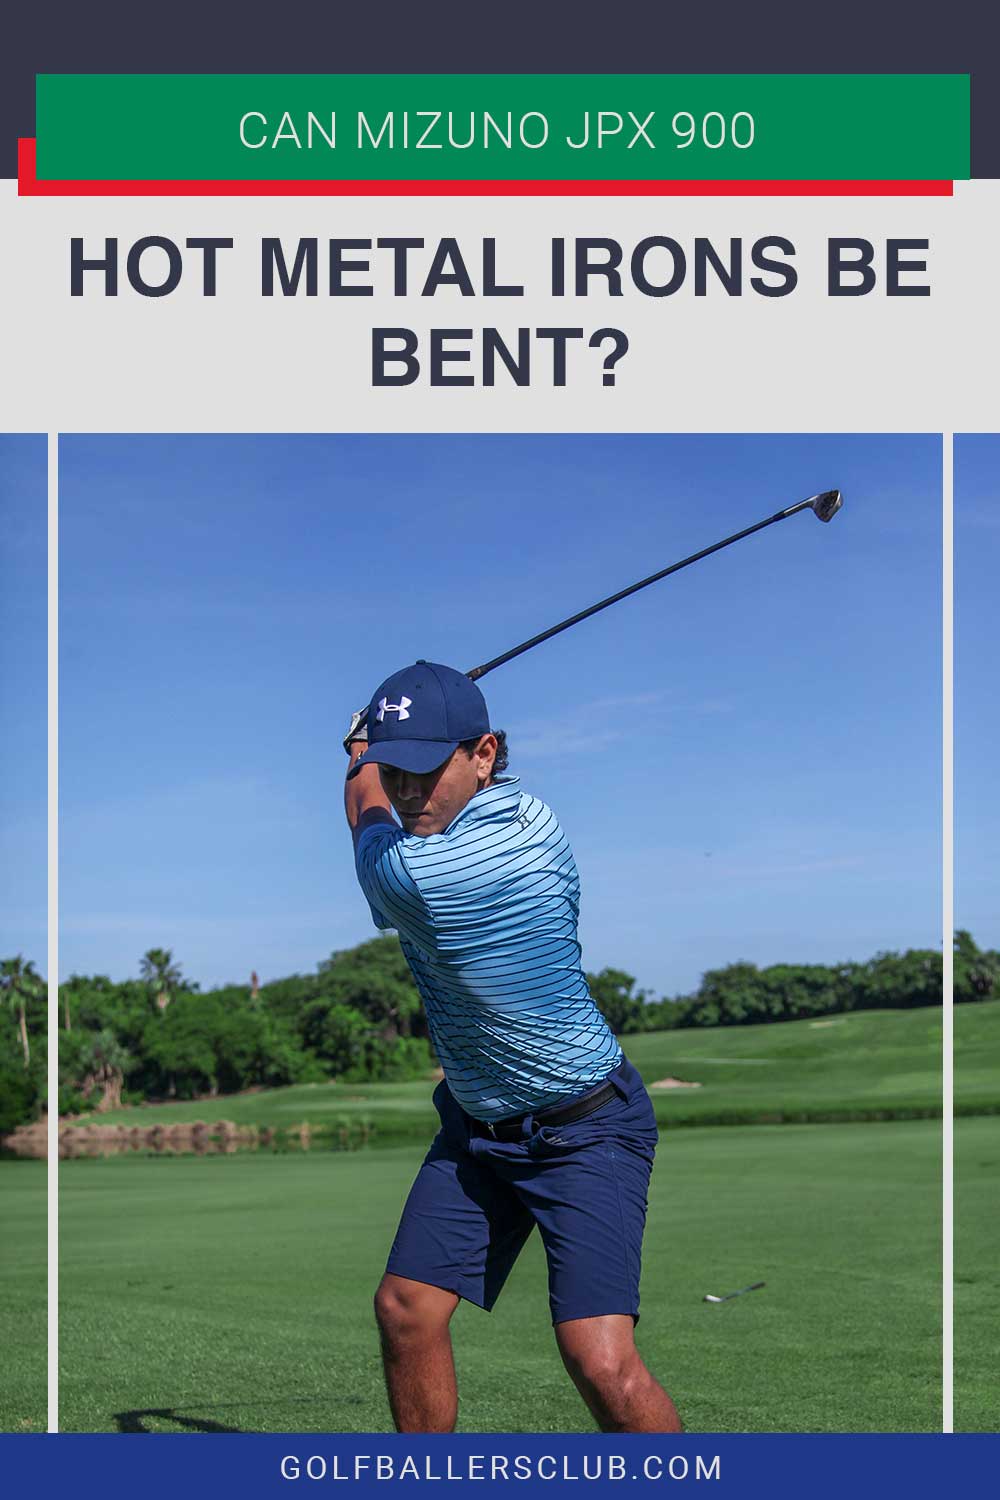 Man in blue polo taking a shot at a golf course - Can Mizuno JPX 900 Hot Metal Irons be bent?